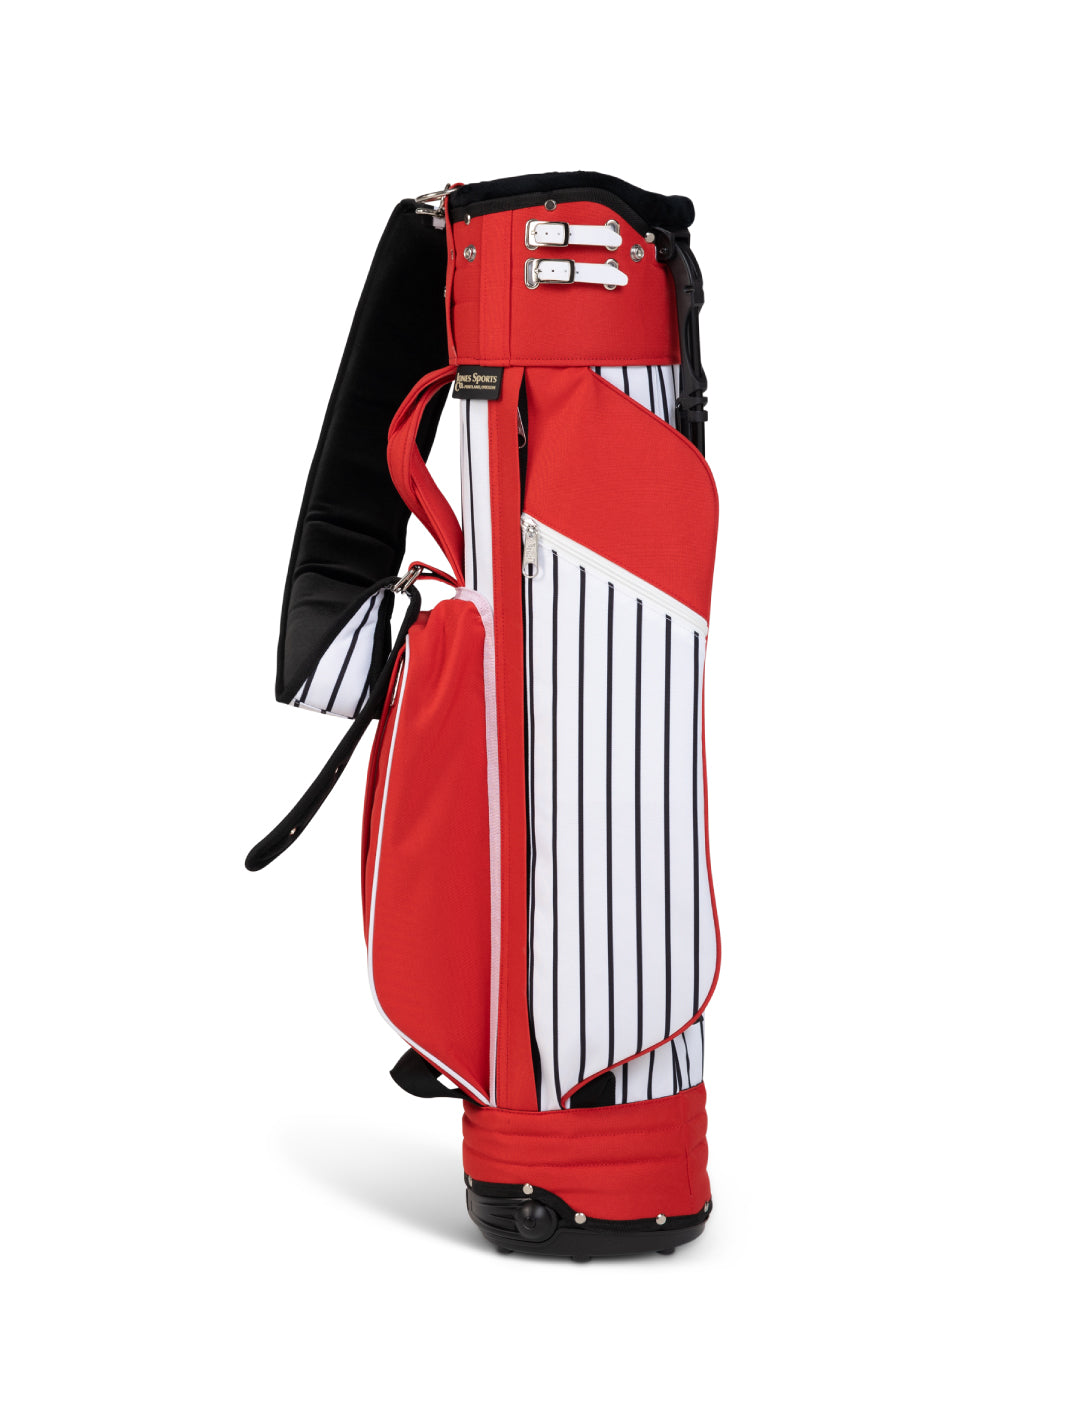 Classic Stand Bag - Red Pinstripe